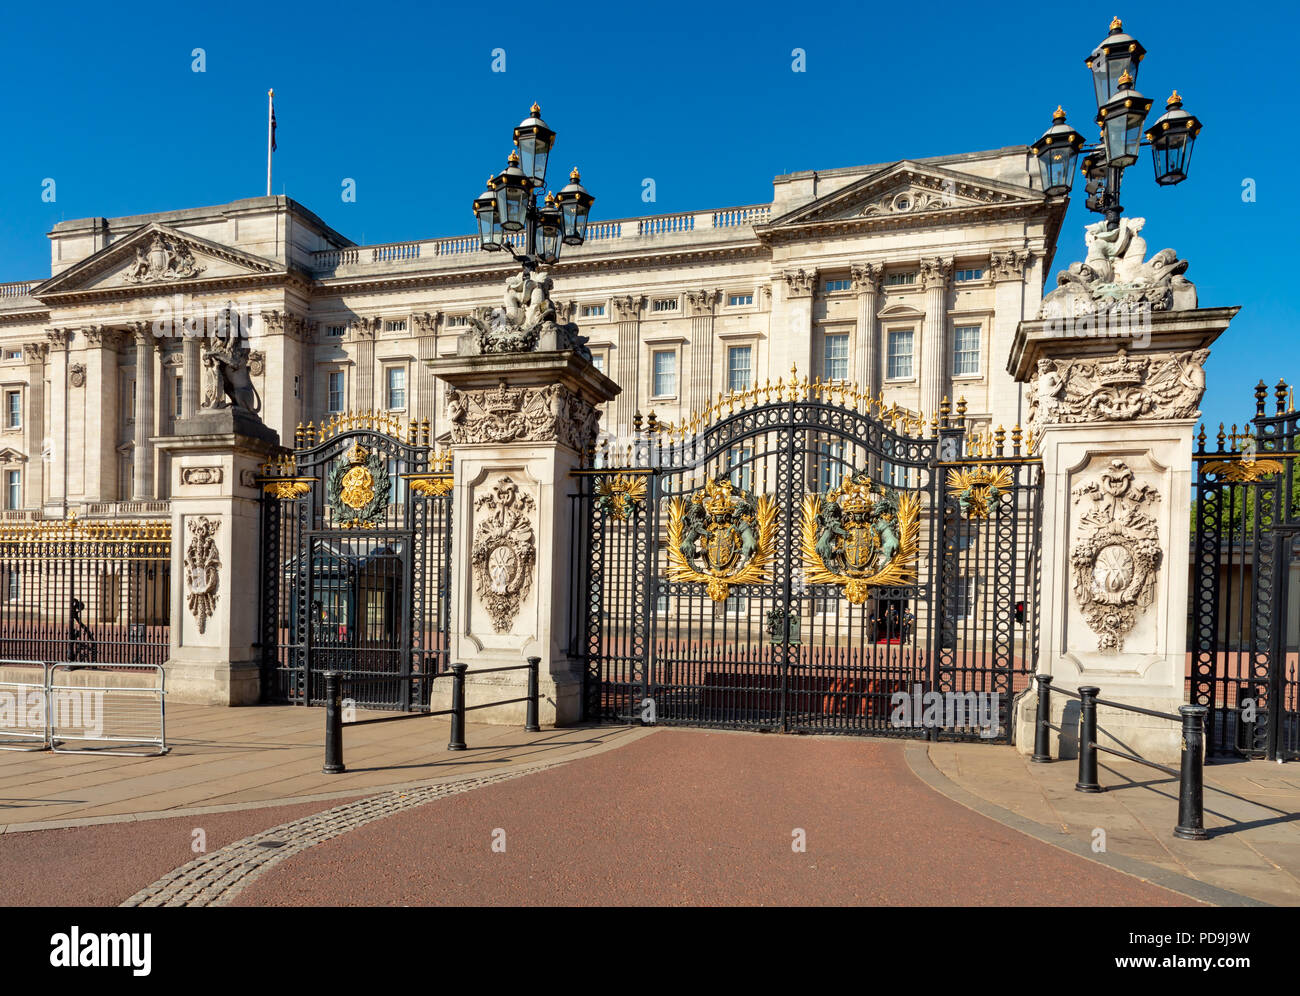 London England August 05, 2018 Royal crest on the gate of Buckingham Palace, the London residence of Her Majesty Queen Elizabeth 2nd Stock Photo